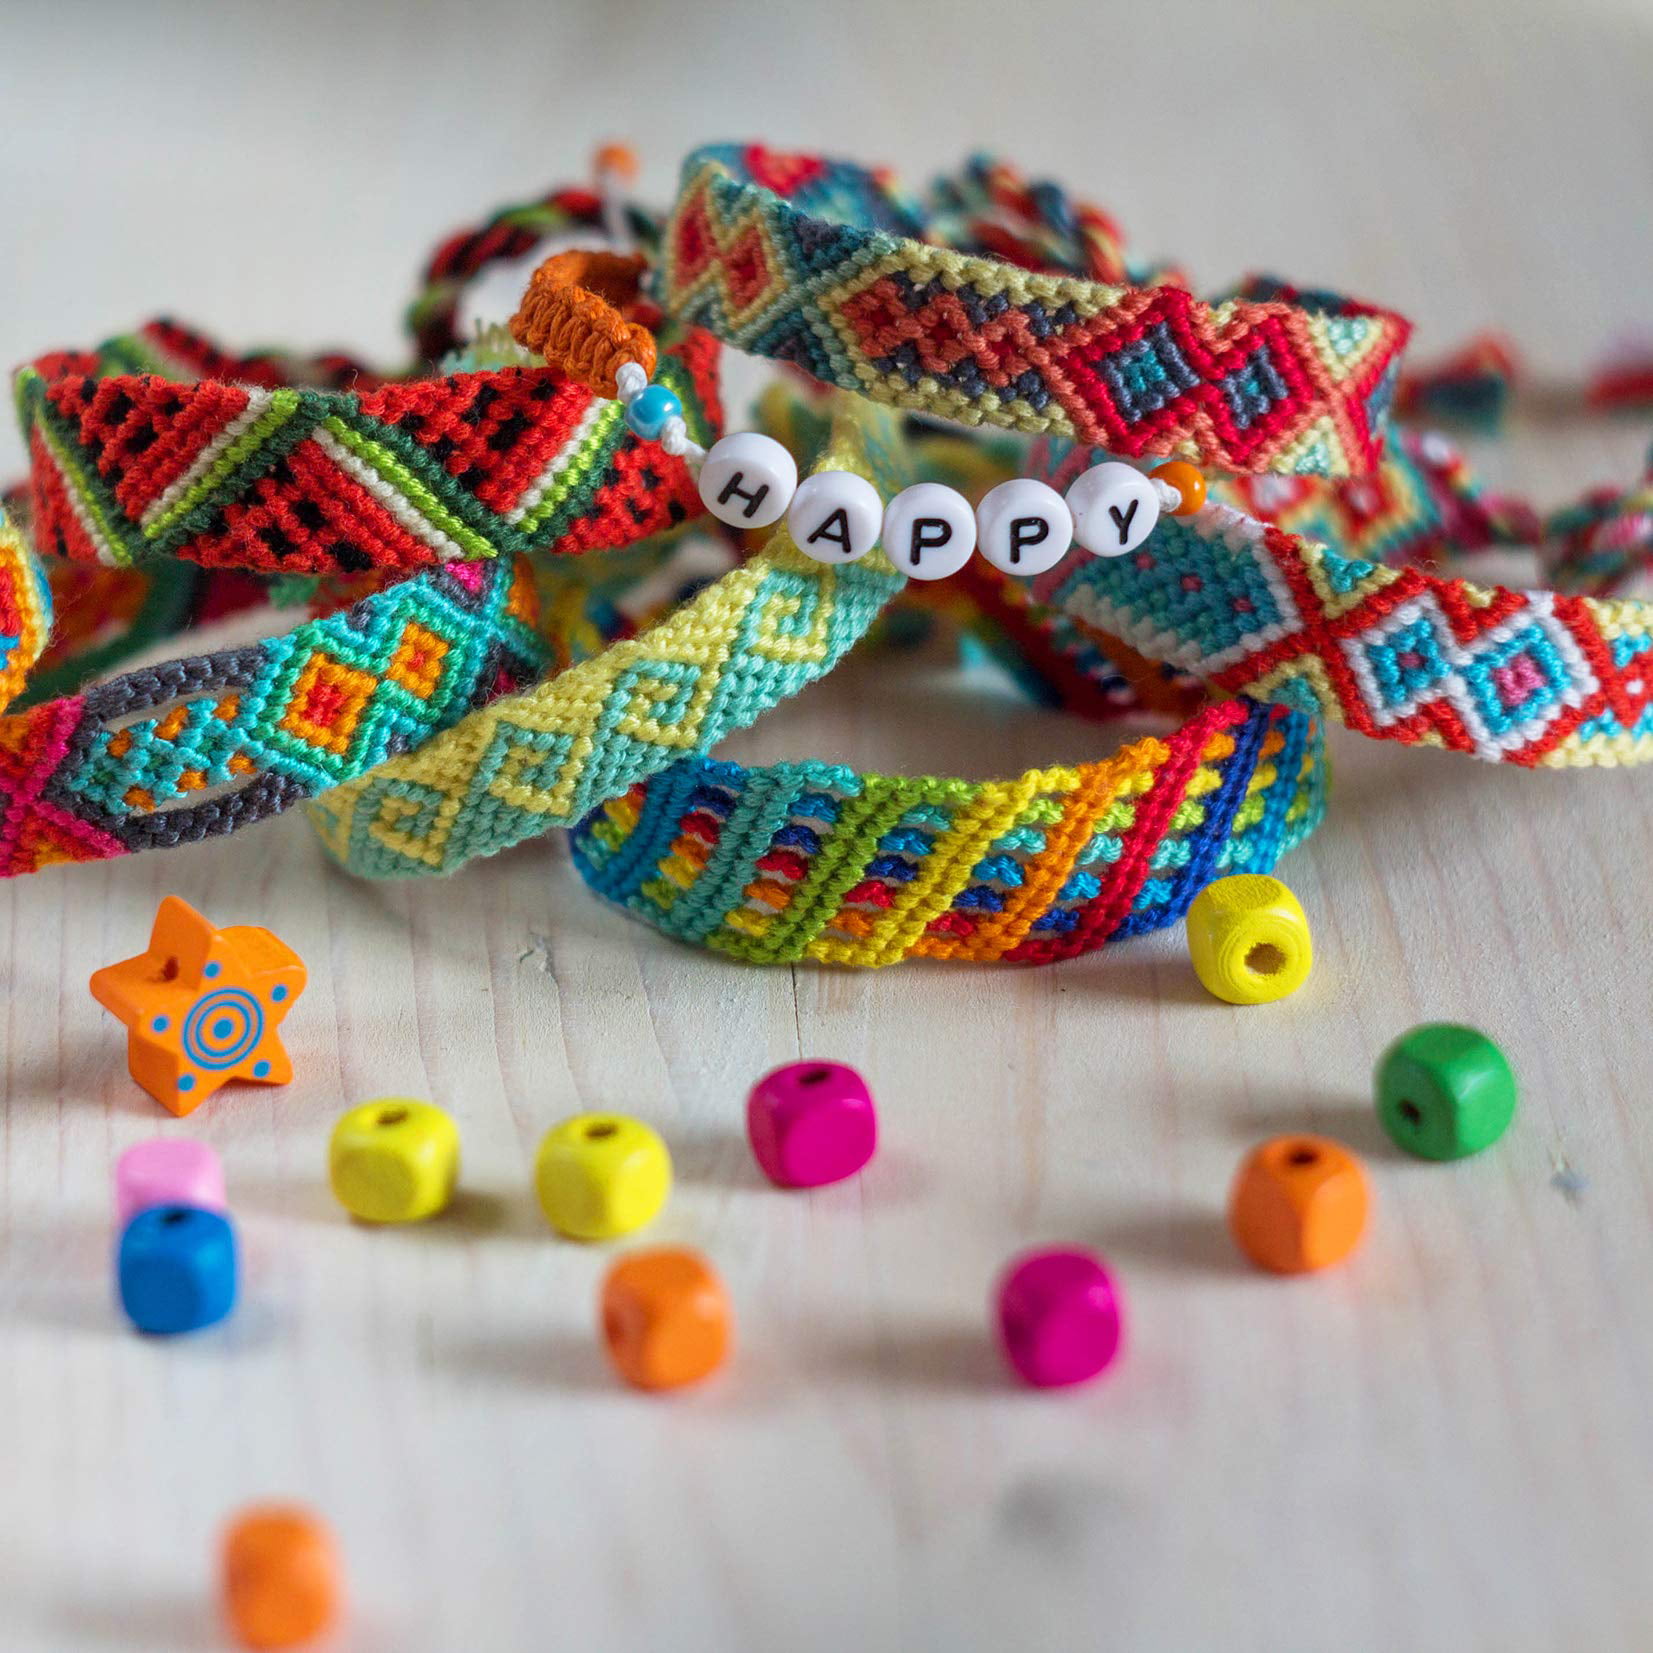 Friendship Bracelet Making Kit, Huge Value, Letter Beads, Crafts For Girls,  20 Multi-Color Embroidery Floss, A-Z Alphabet Beads, Knot Patterns,  Colorful String, Bracelet Charms, Friendship Bracelets, : : Toys &  Games